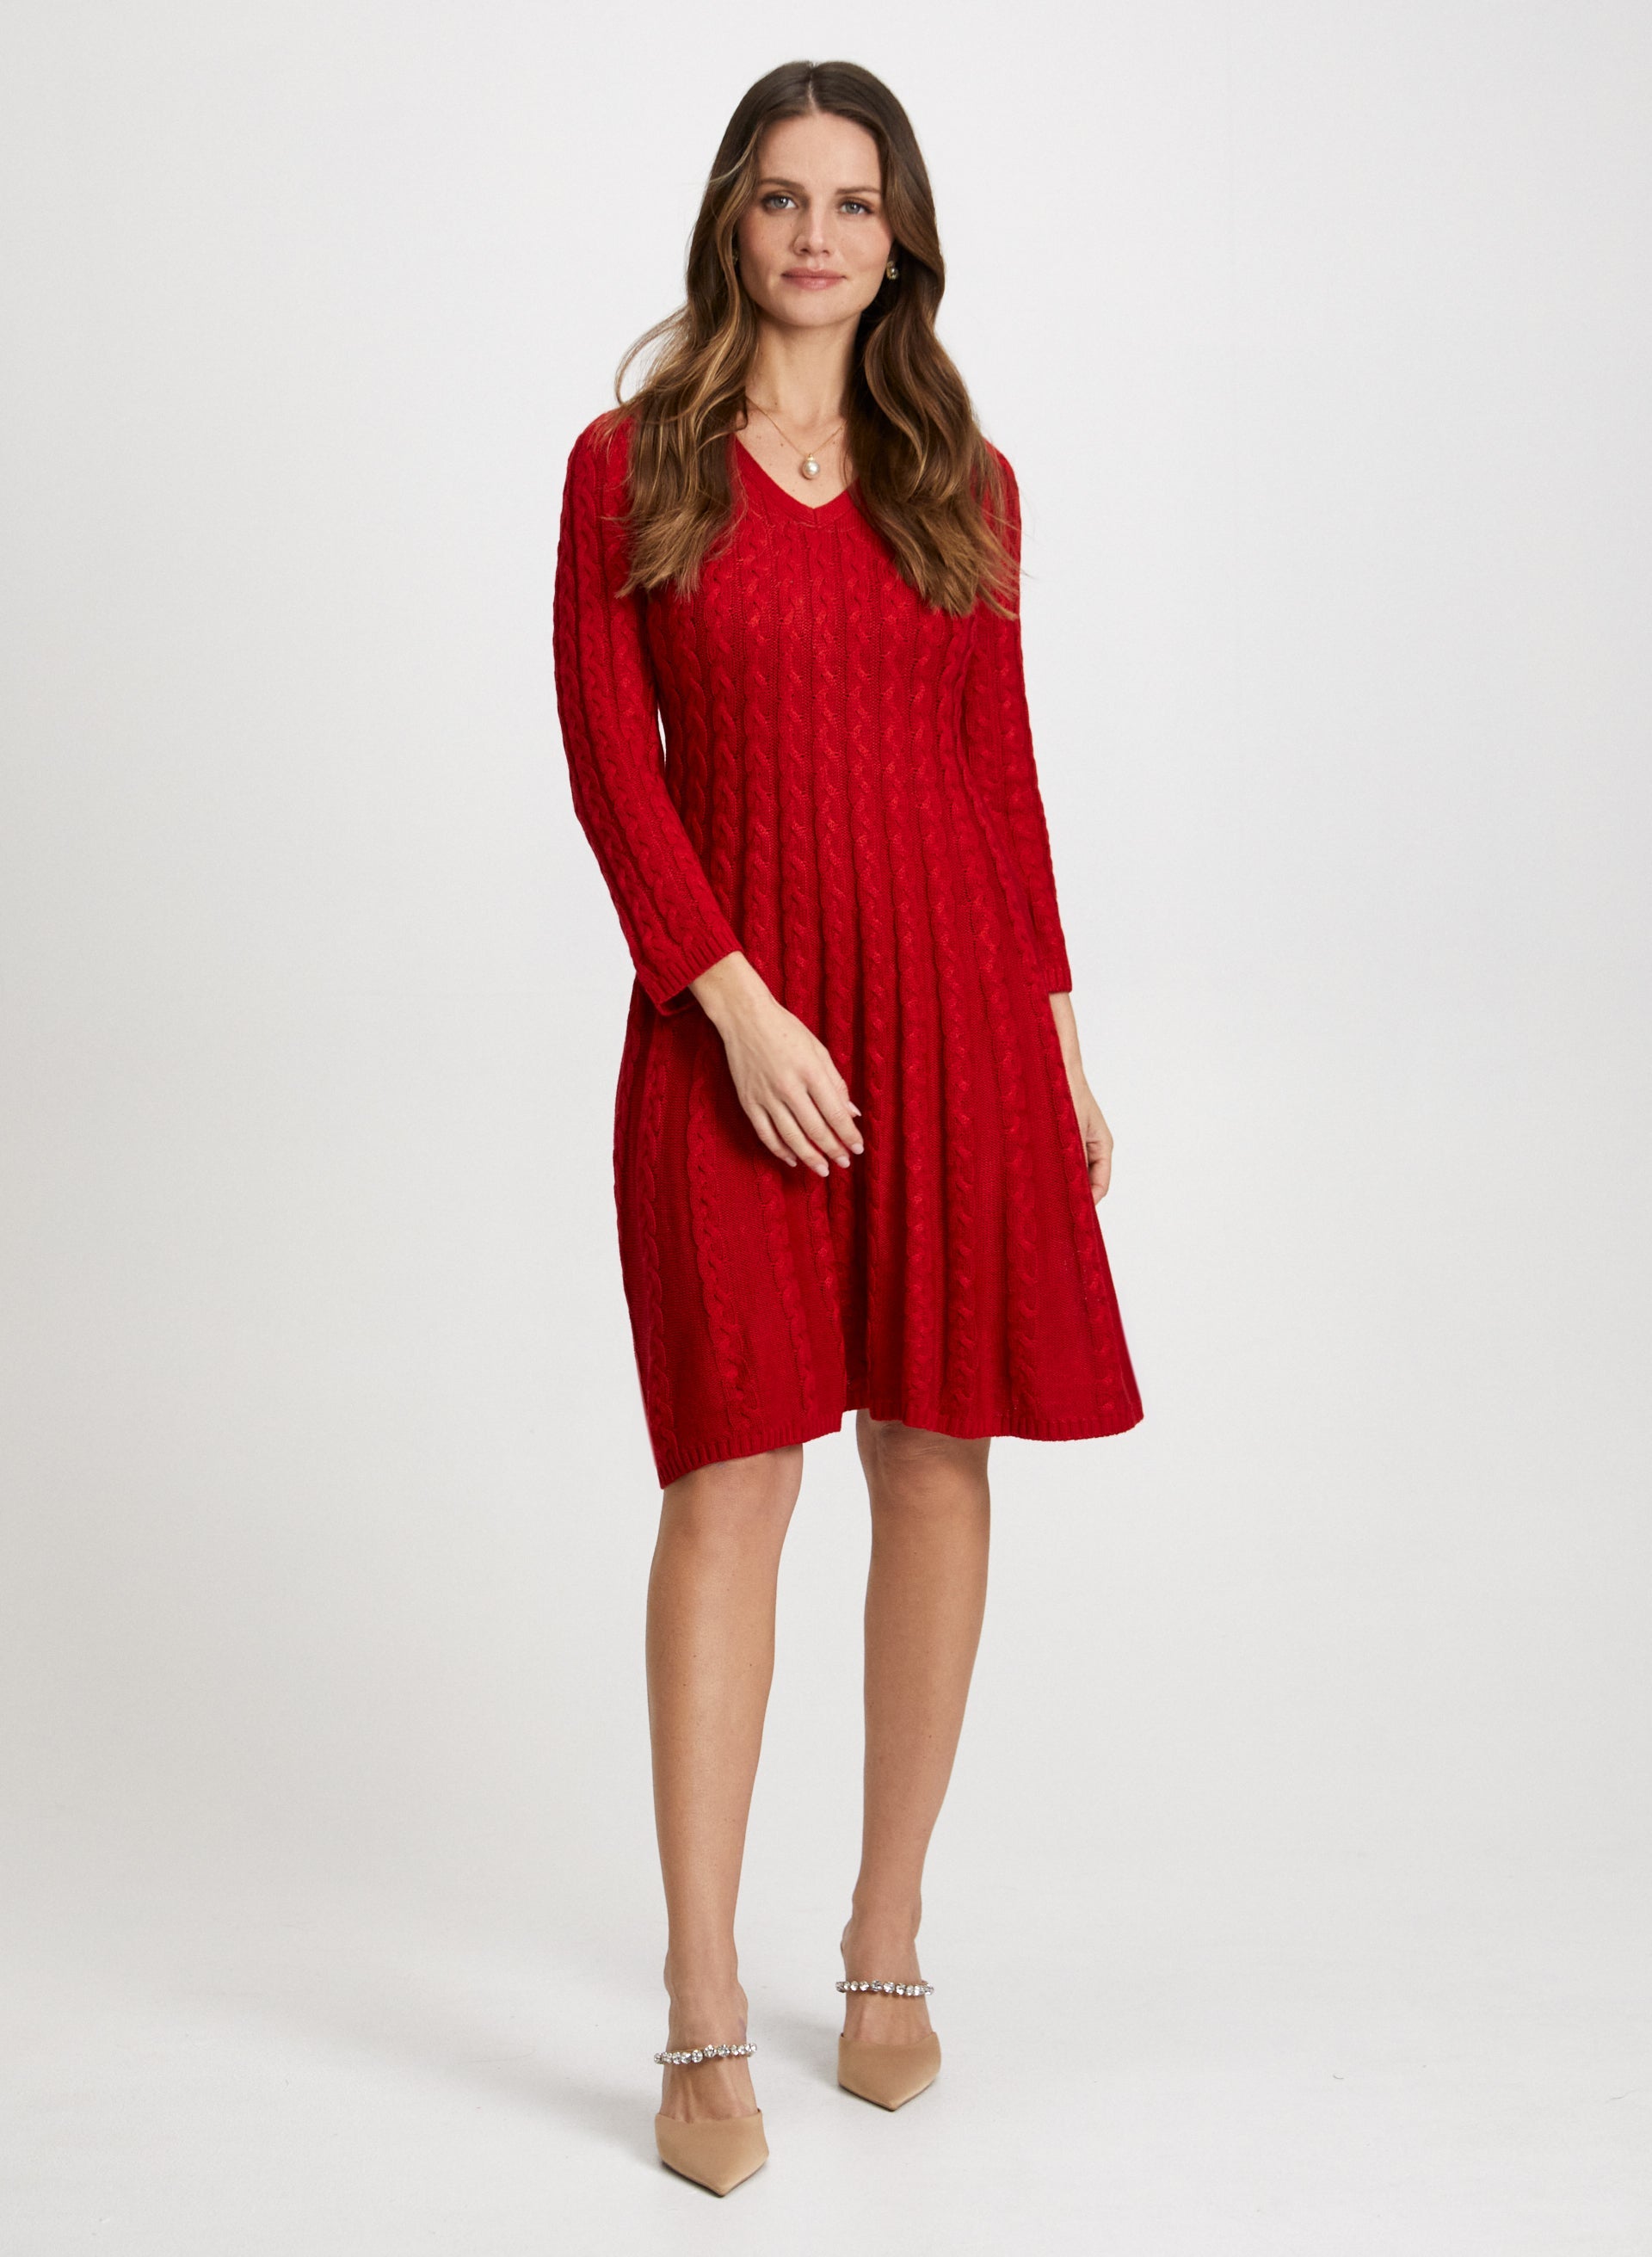  PRDECE Sweater Dress for Women One Shoulder Cable Knit